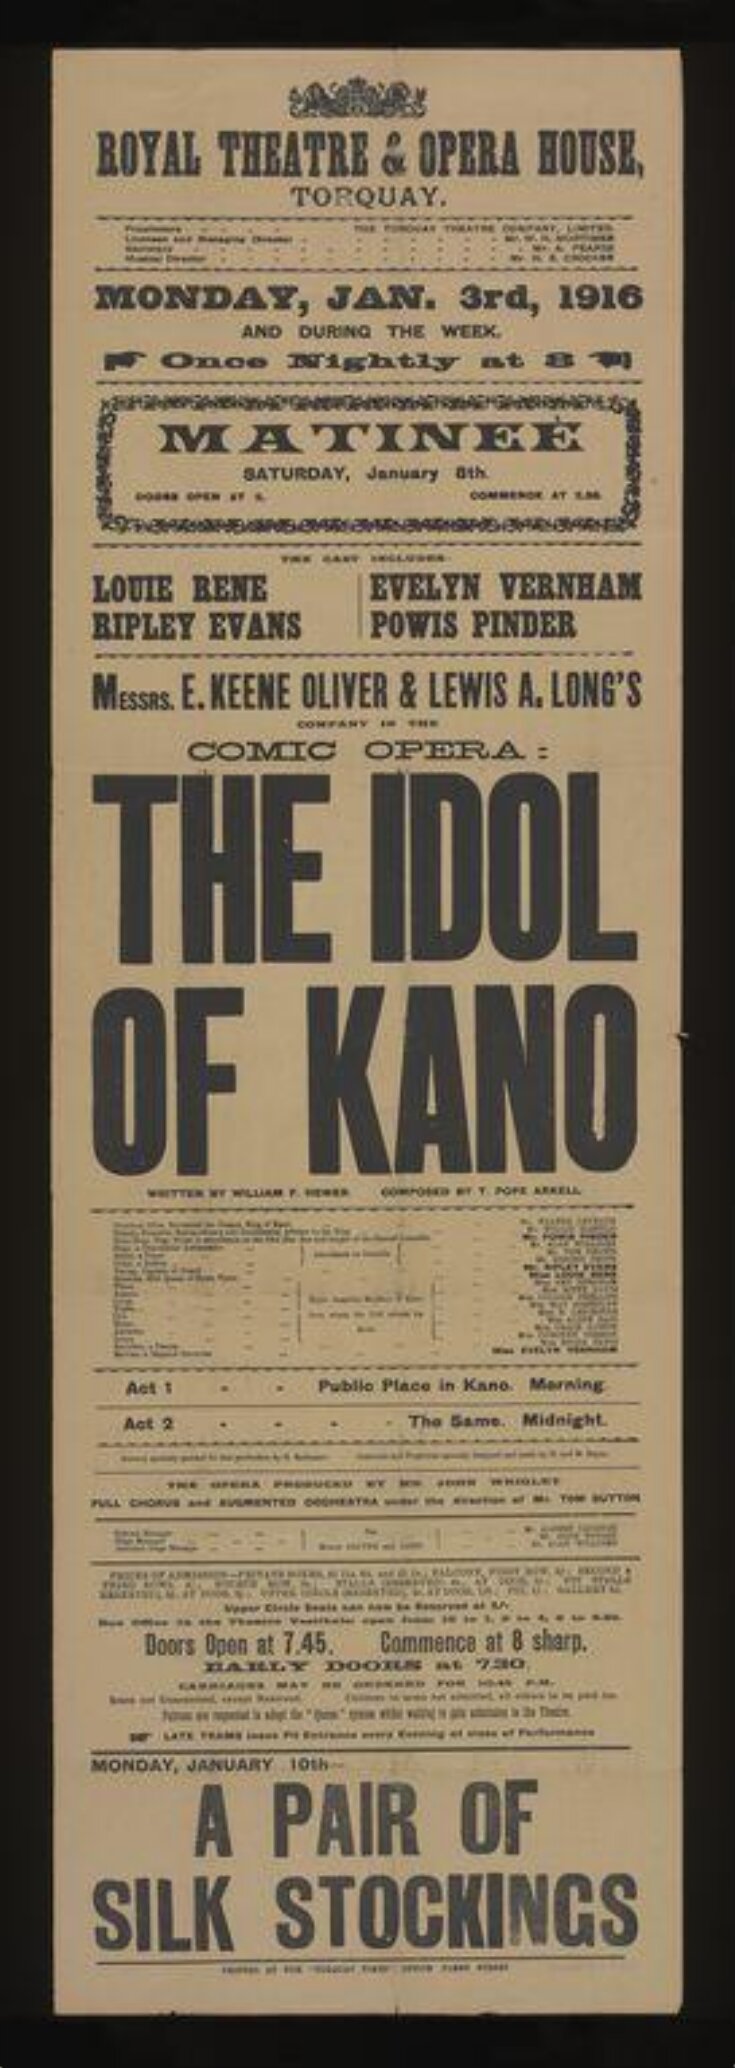 The Idol of Kano poster image